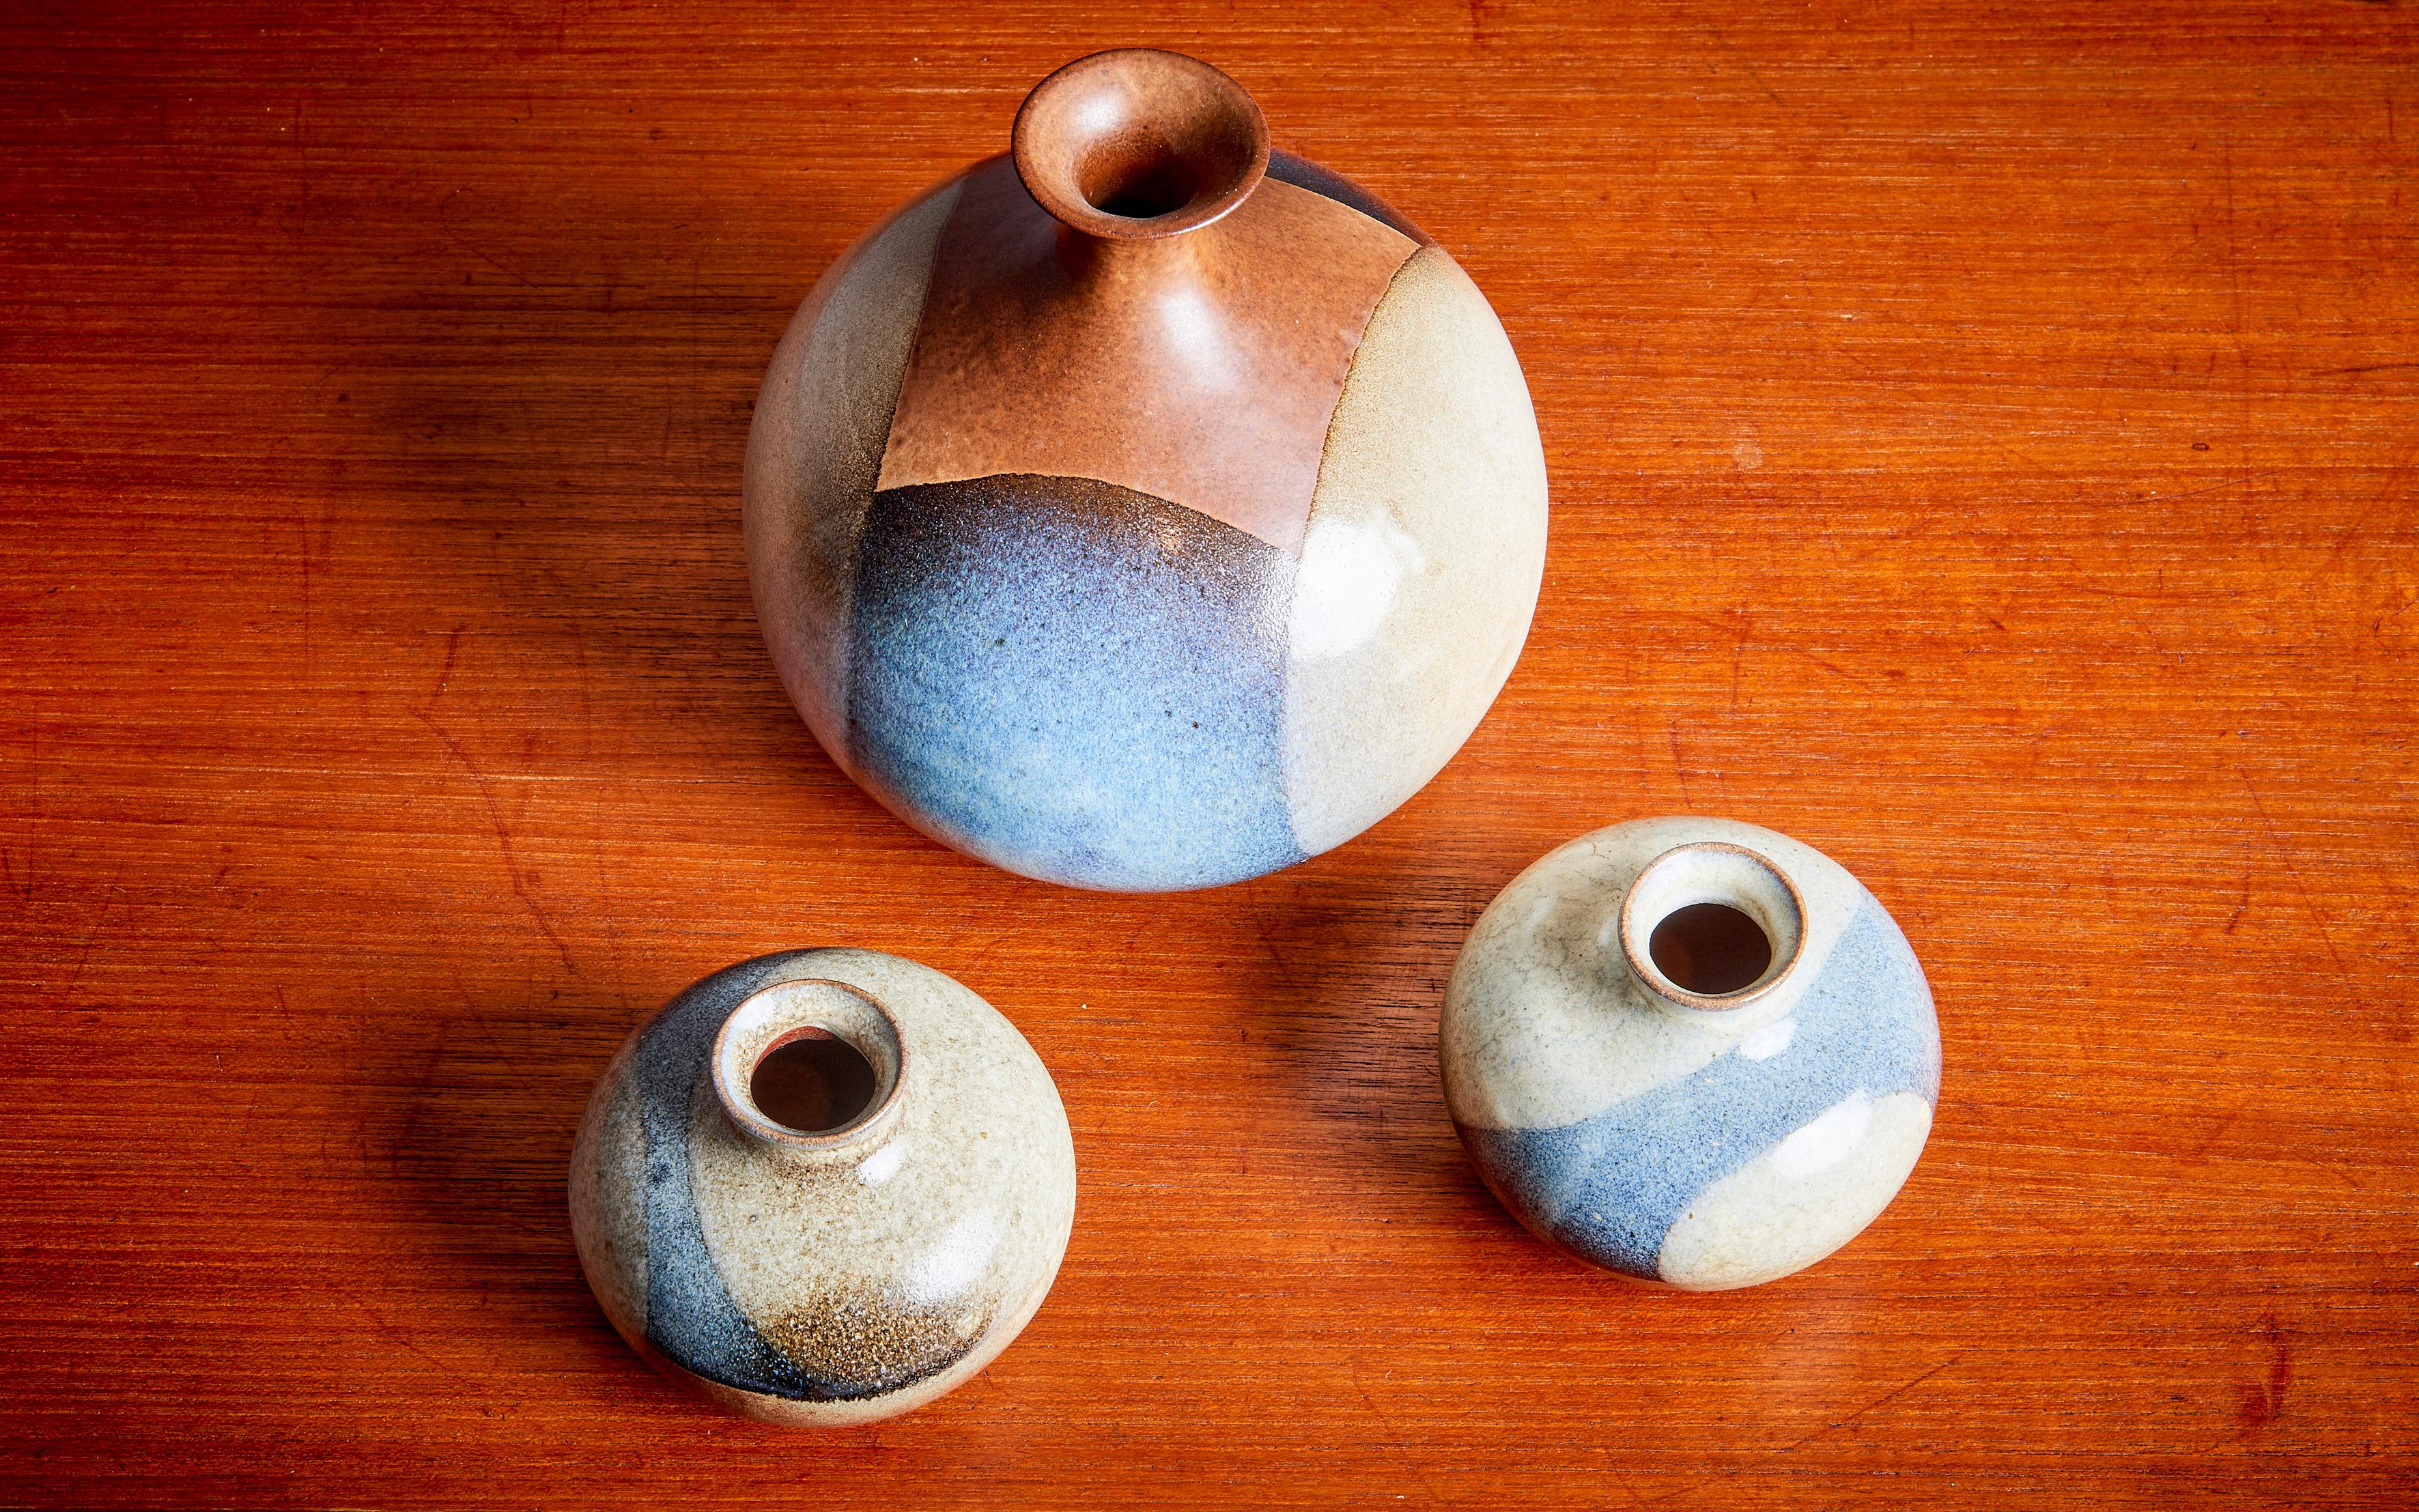 Robert Maxwell Set of 3 Ceramic Vases. The measurements given apply to the larger vase. The two smaller ones measure 9cm in diameter and 7.5cm in height. 